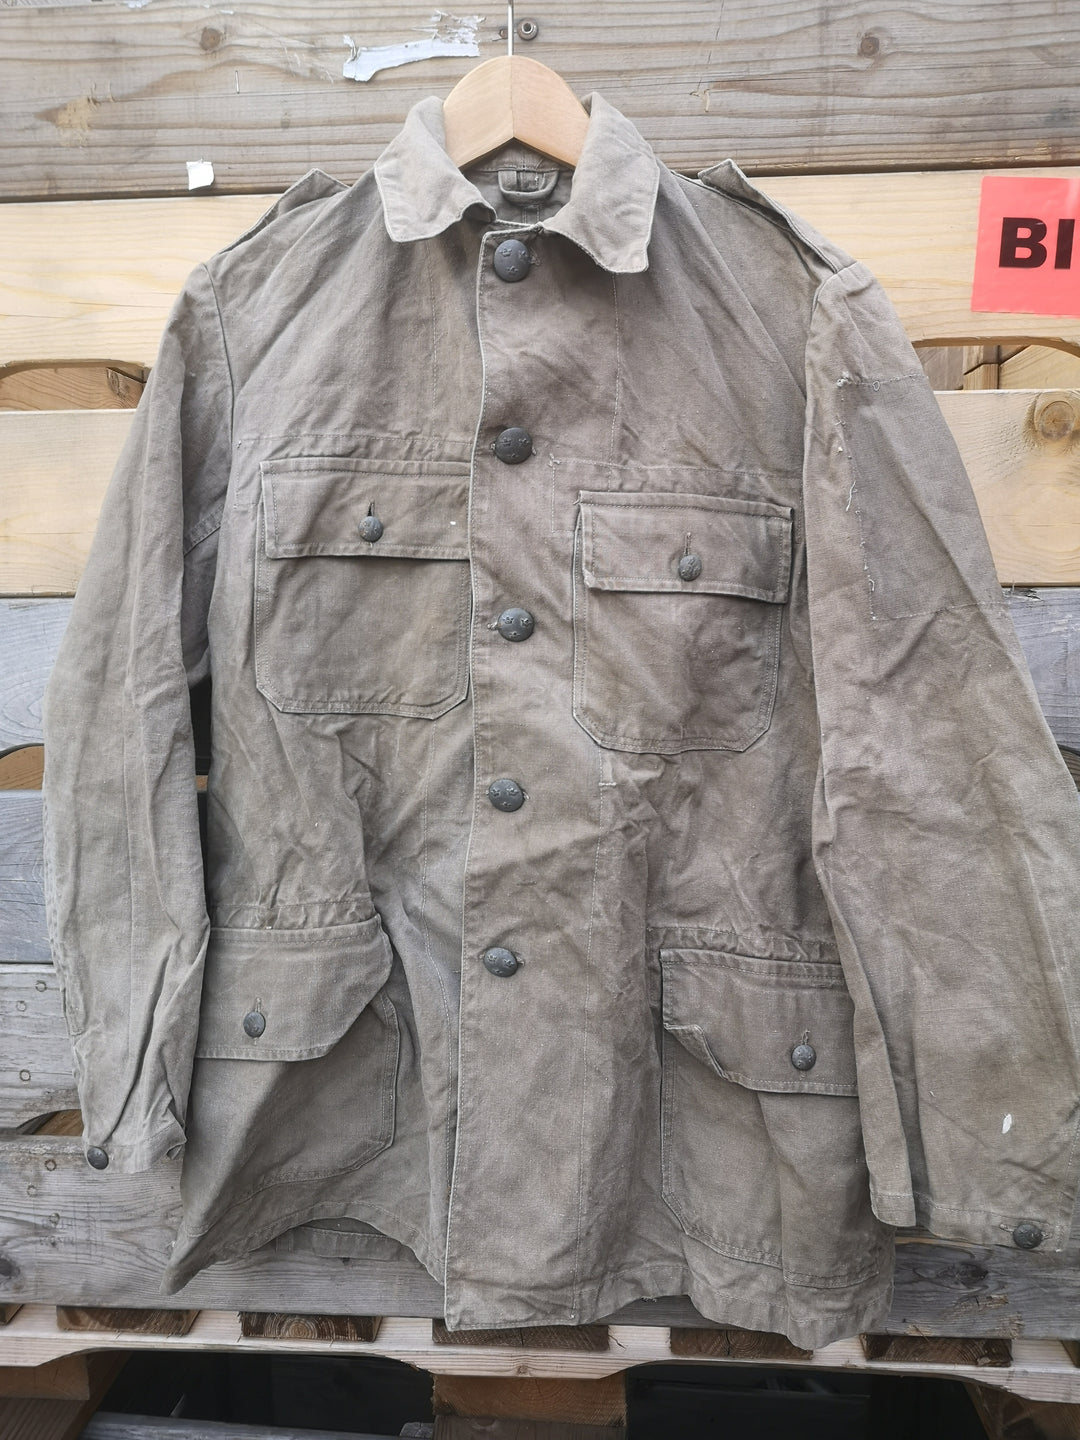 Vintage Khaki green army jacket with grey metal buttons, hanging from industrial wooden pallet.